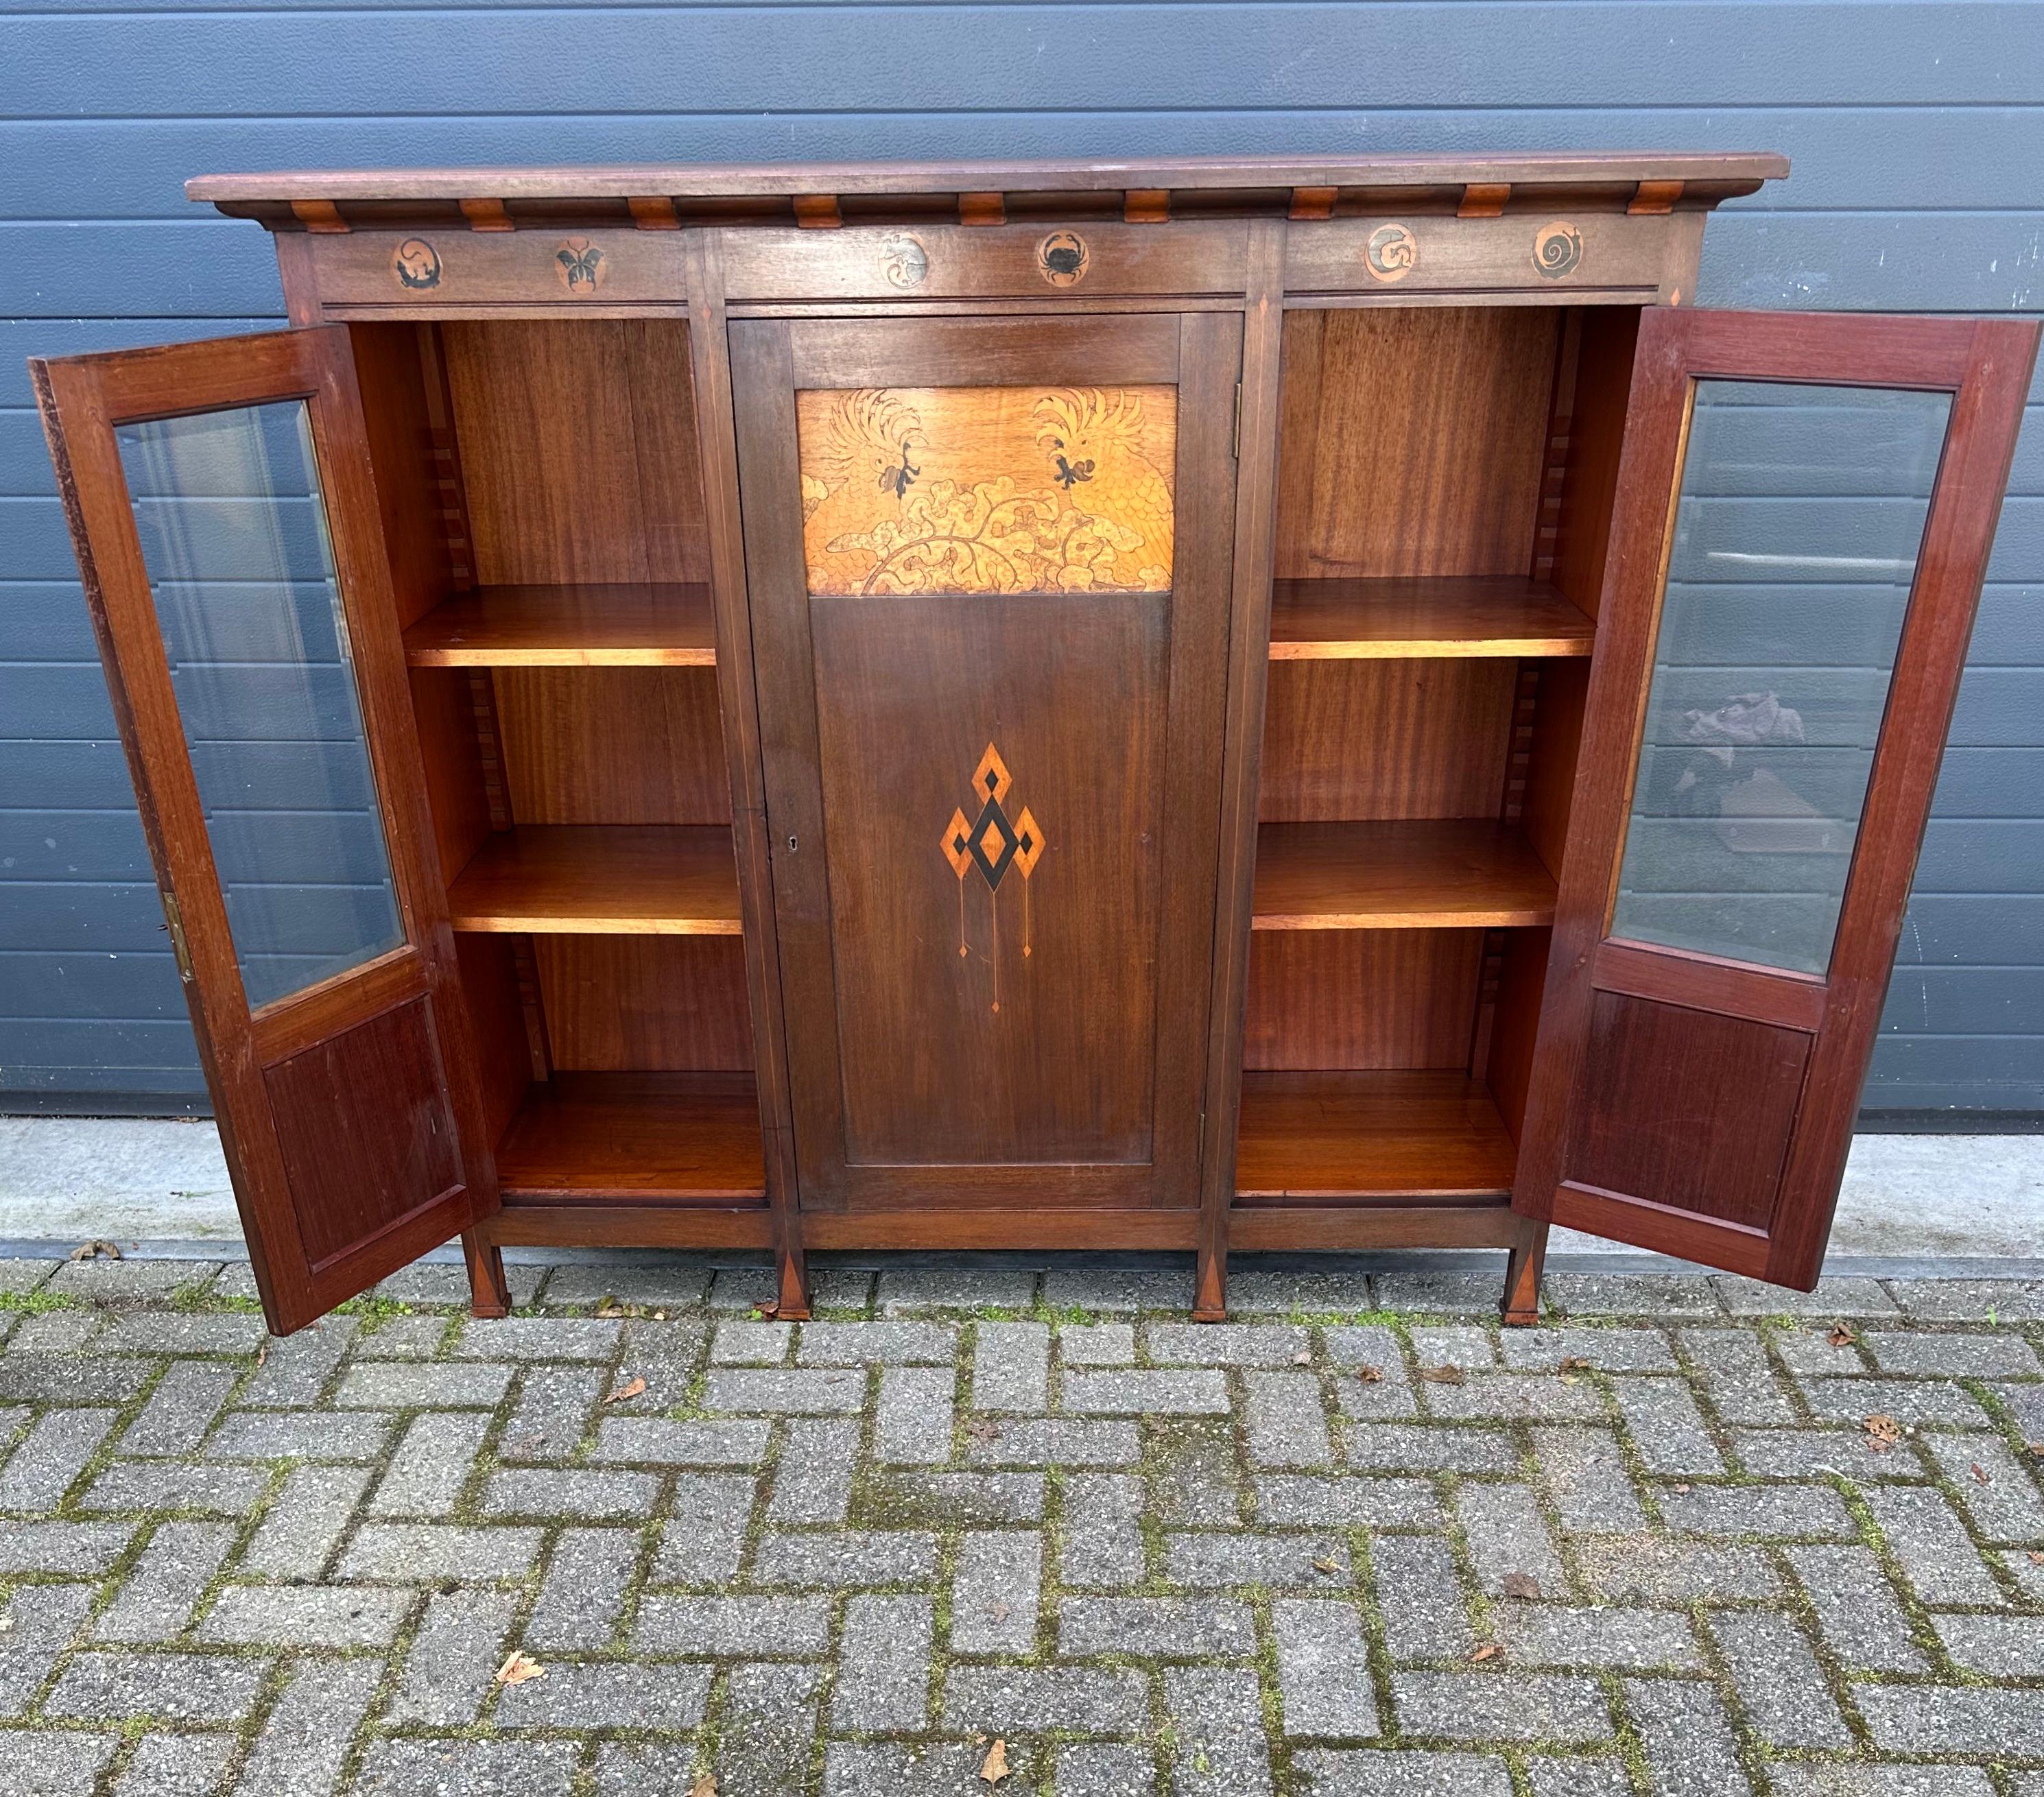 Beveled Important & Unique Arts & Crafts Bookcase Sideboard Cabinet by Napoleon Le Grand For Sale